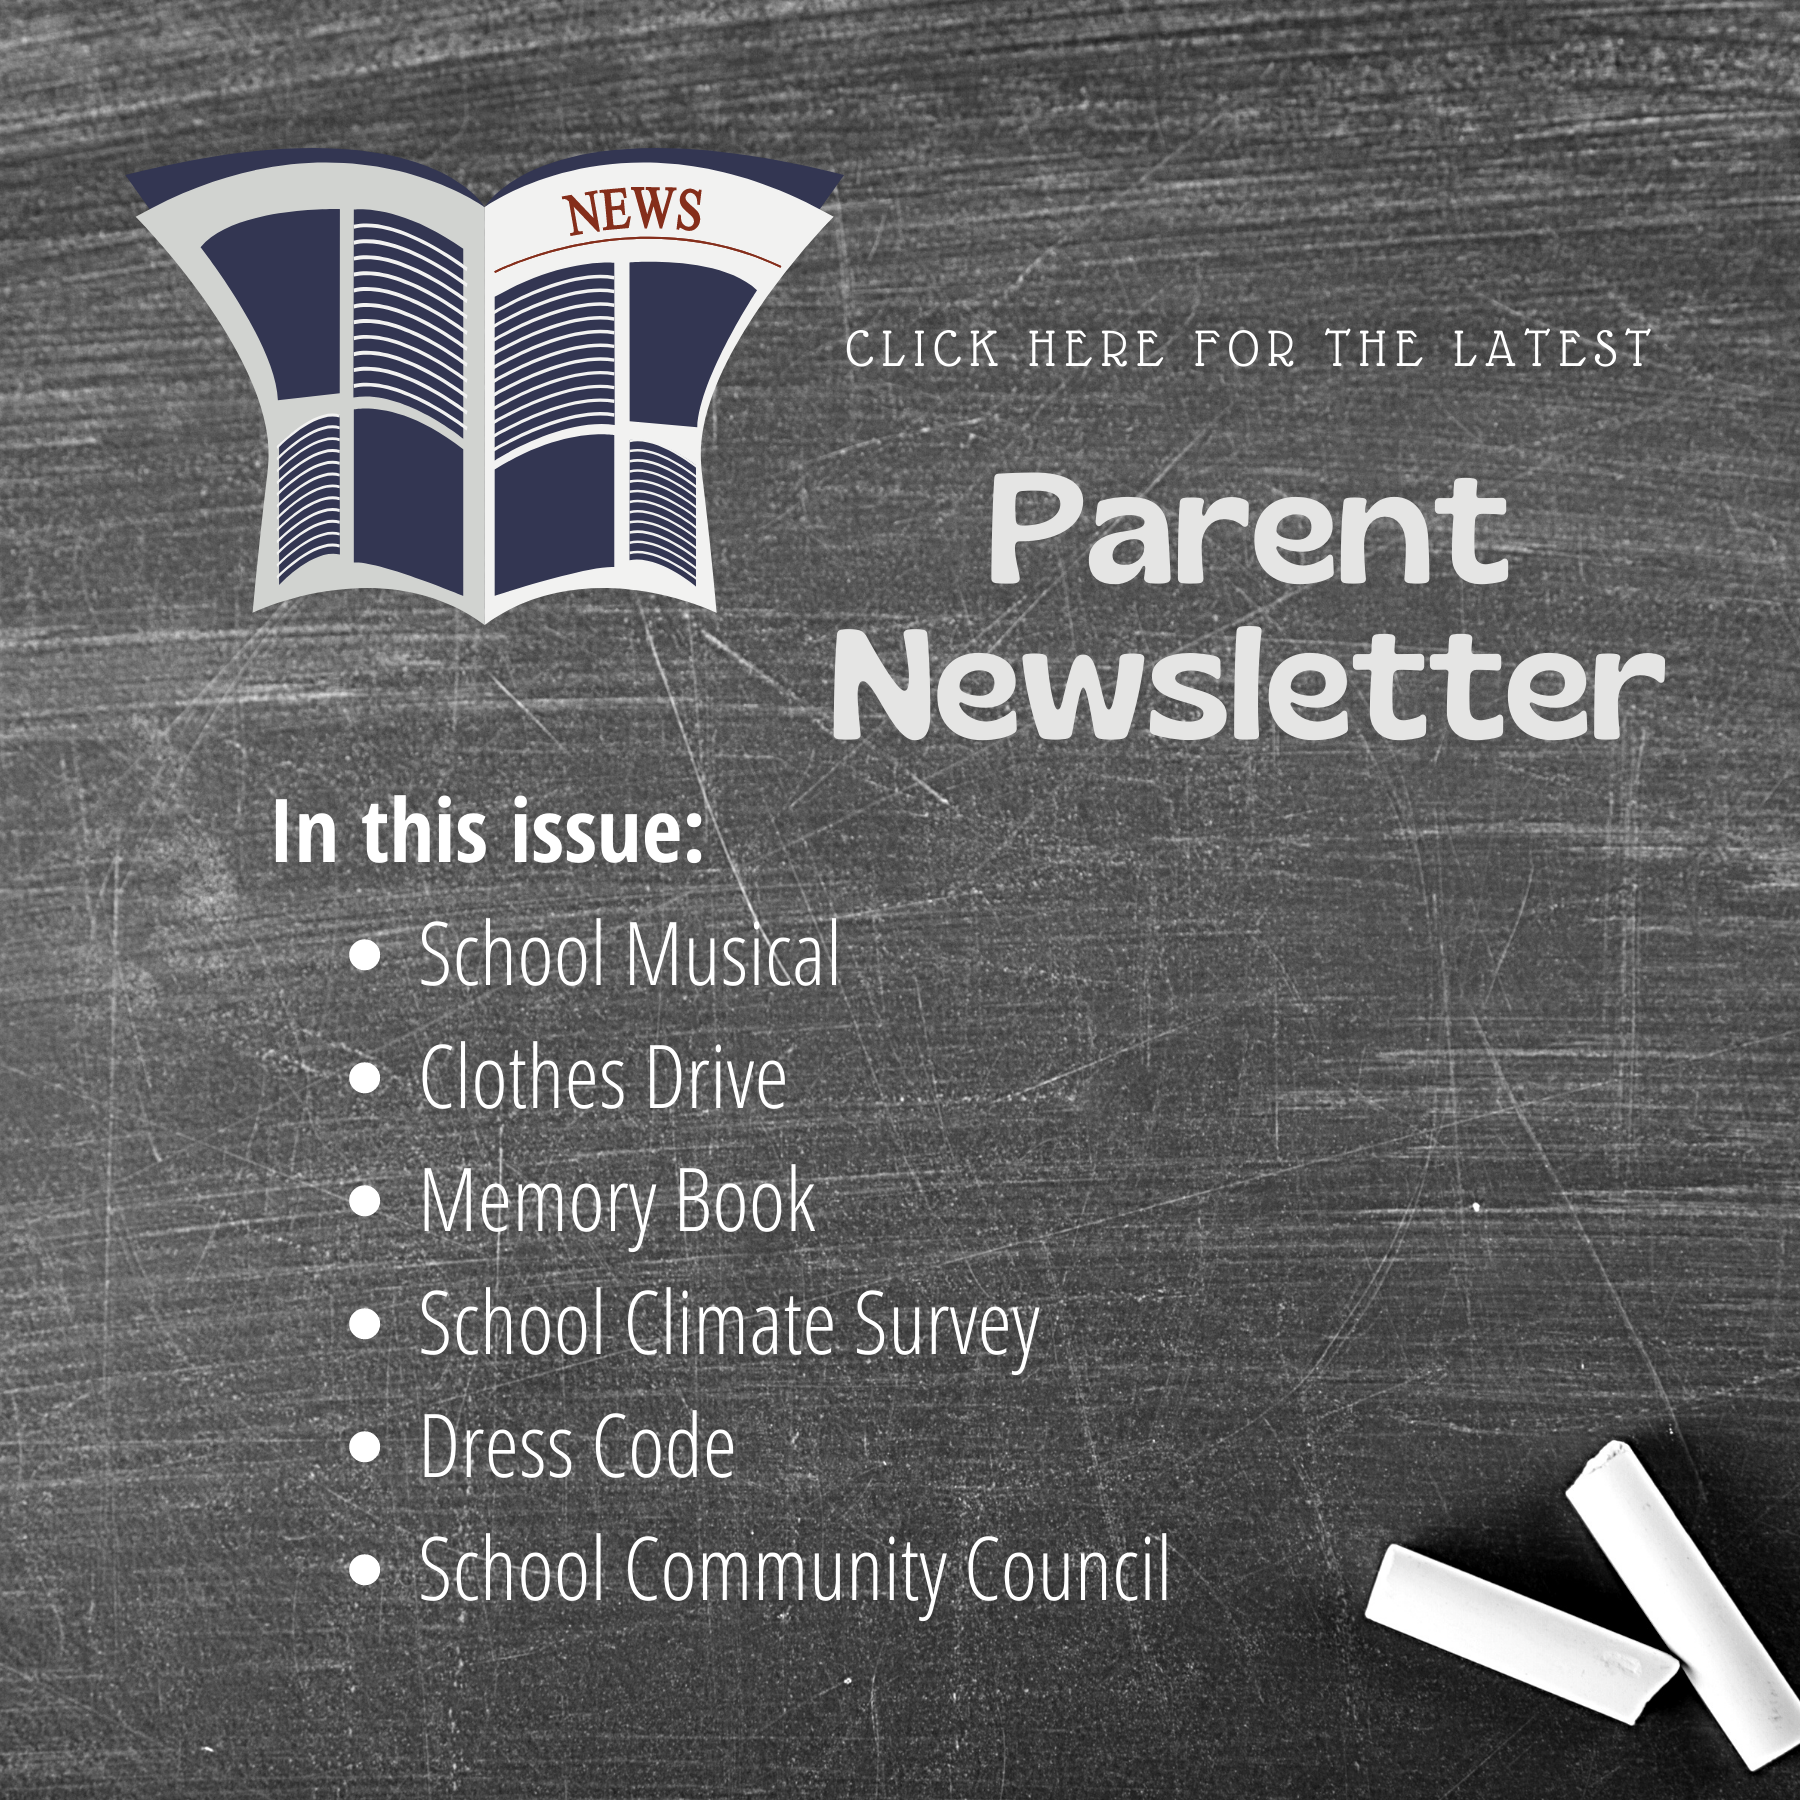 Click here for the latest parent newsletter.